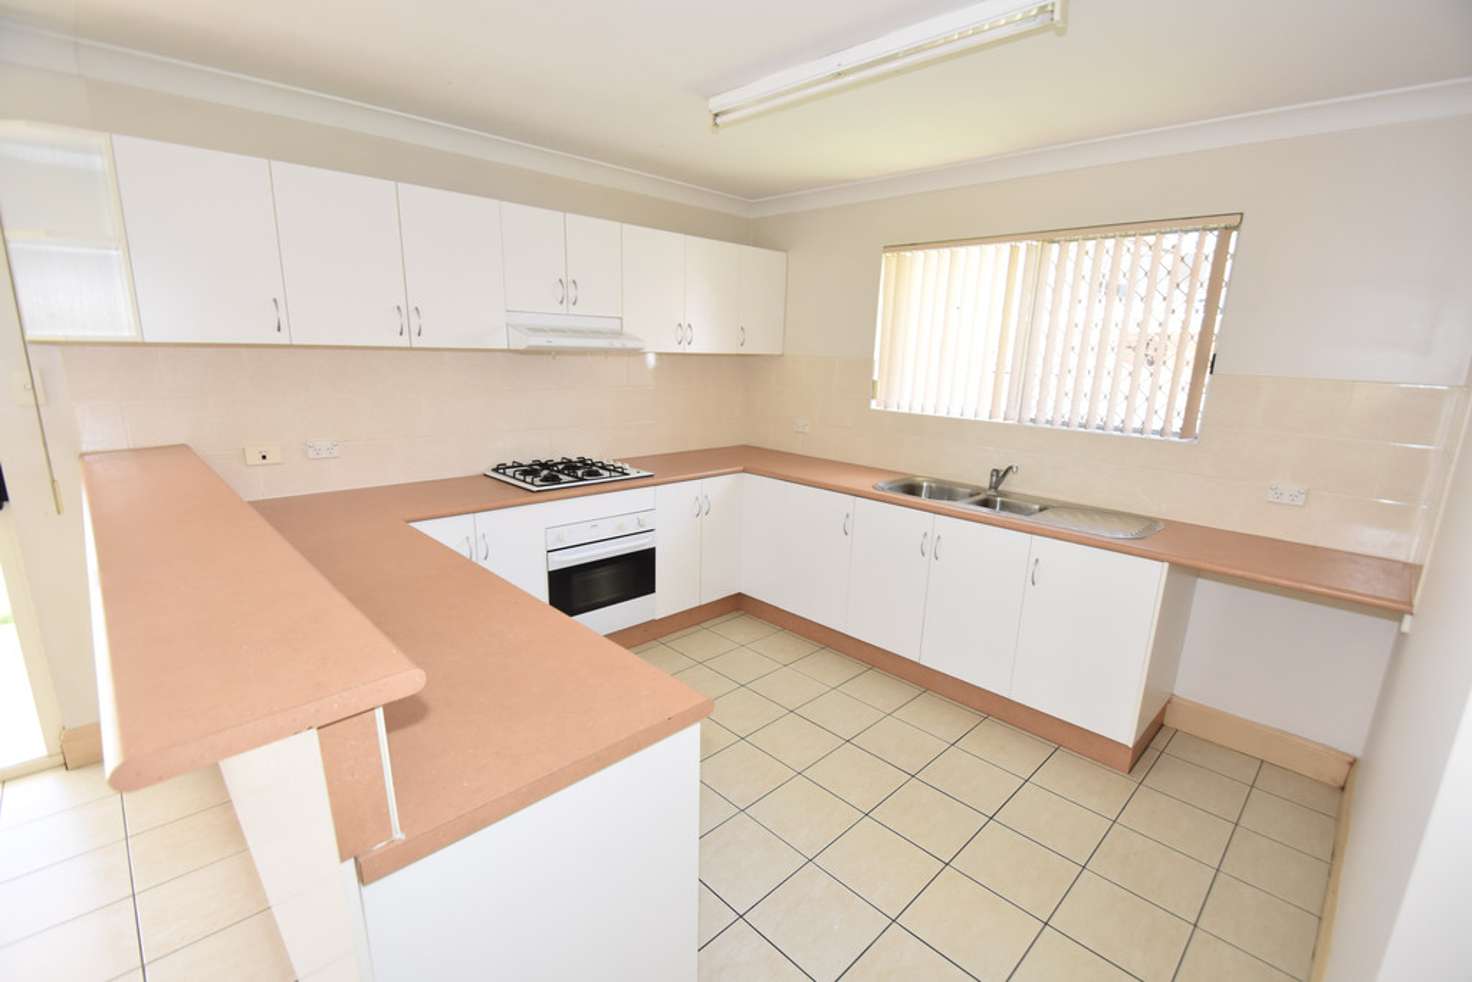 Main view of Homely unit listing, 3/3 Benstead Street, The Gap NT 870